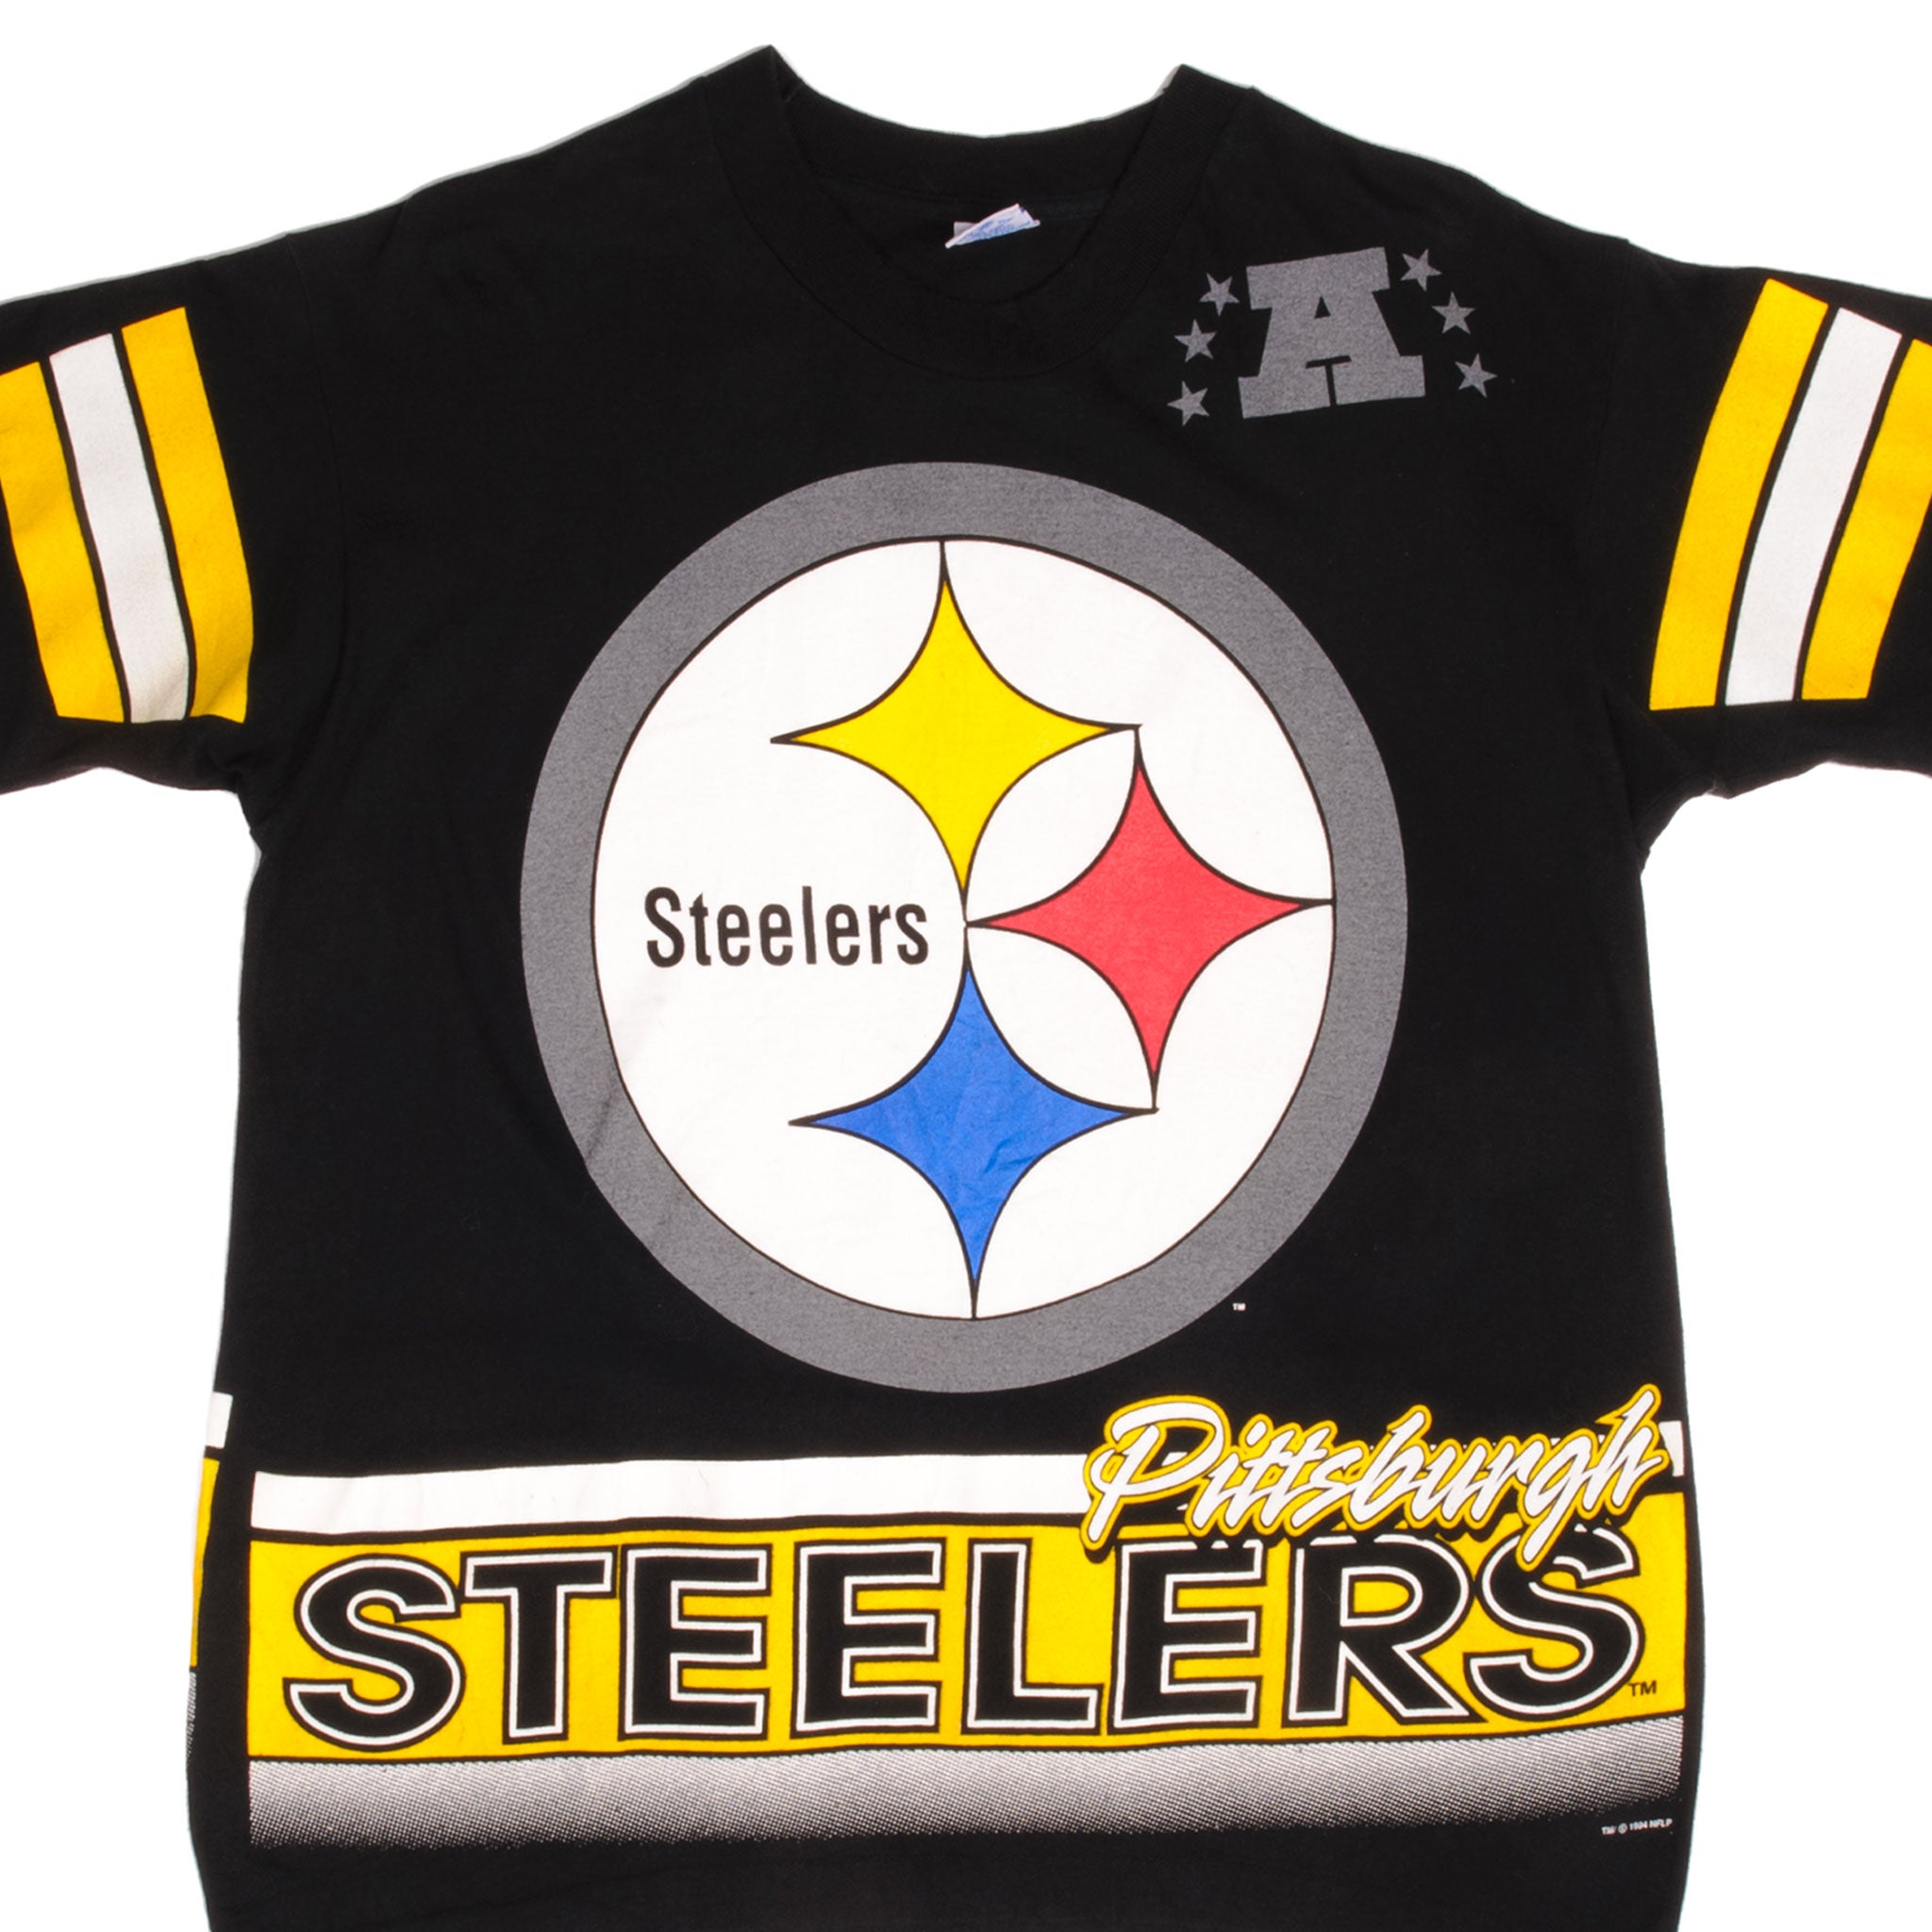 Sports / College Vintage NFL Pittsburgh Steelers All Over Print Tee Shirt 1994 Large Made in USA